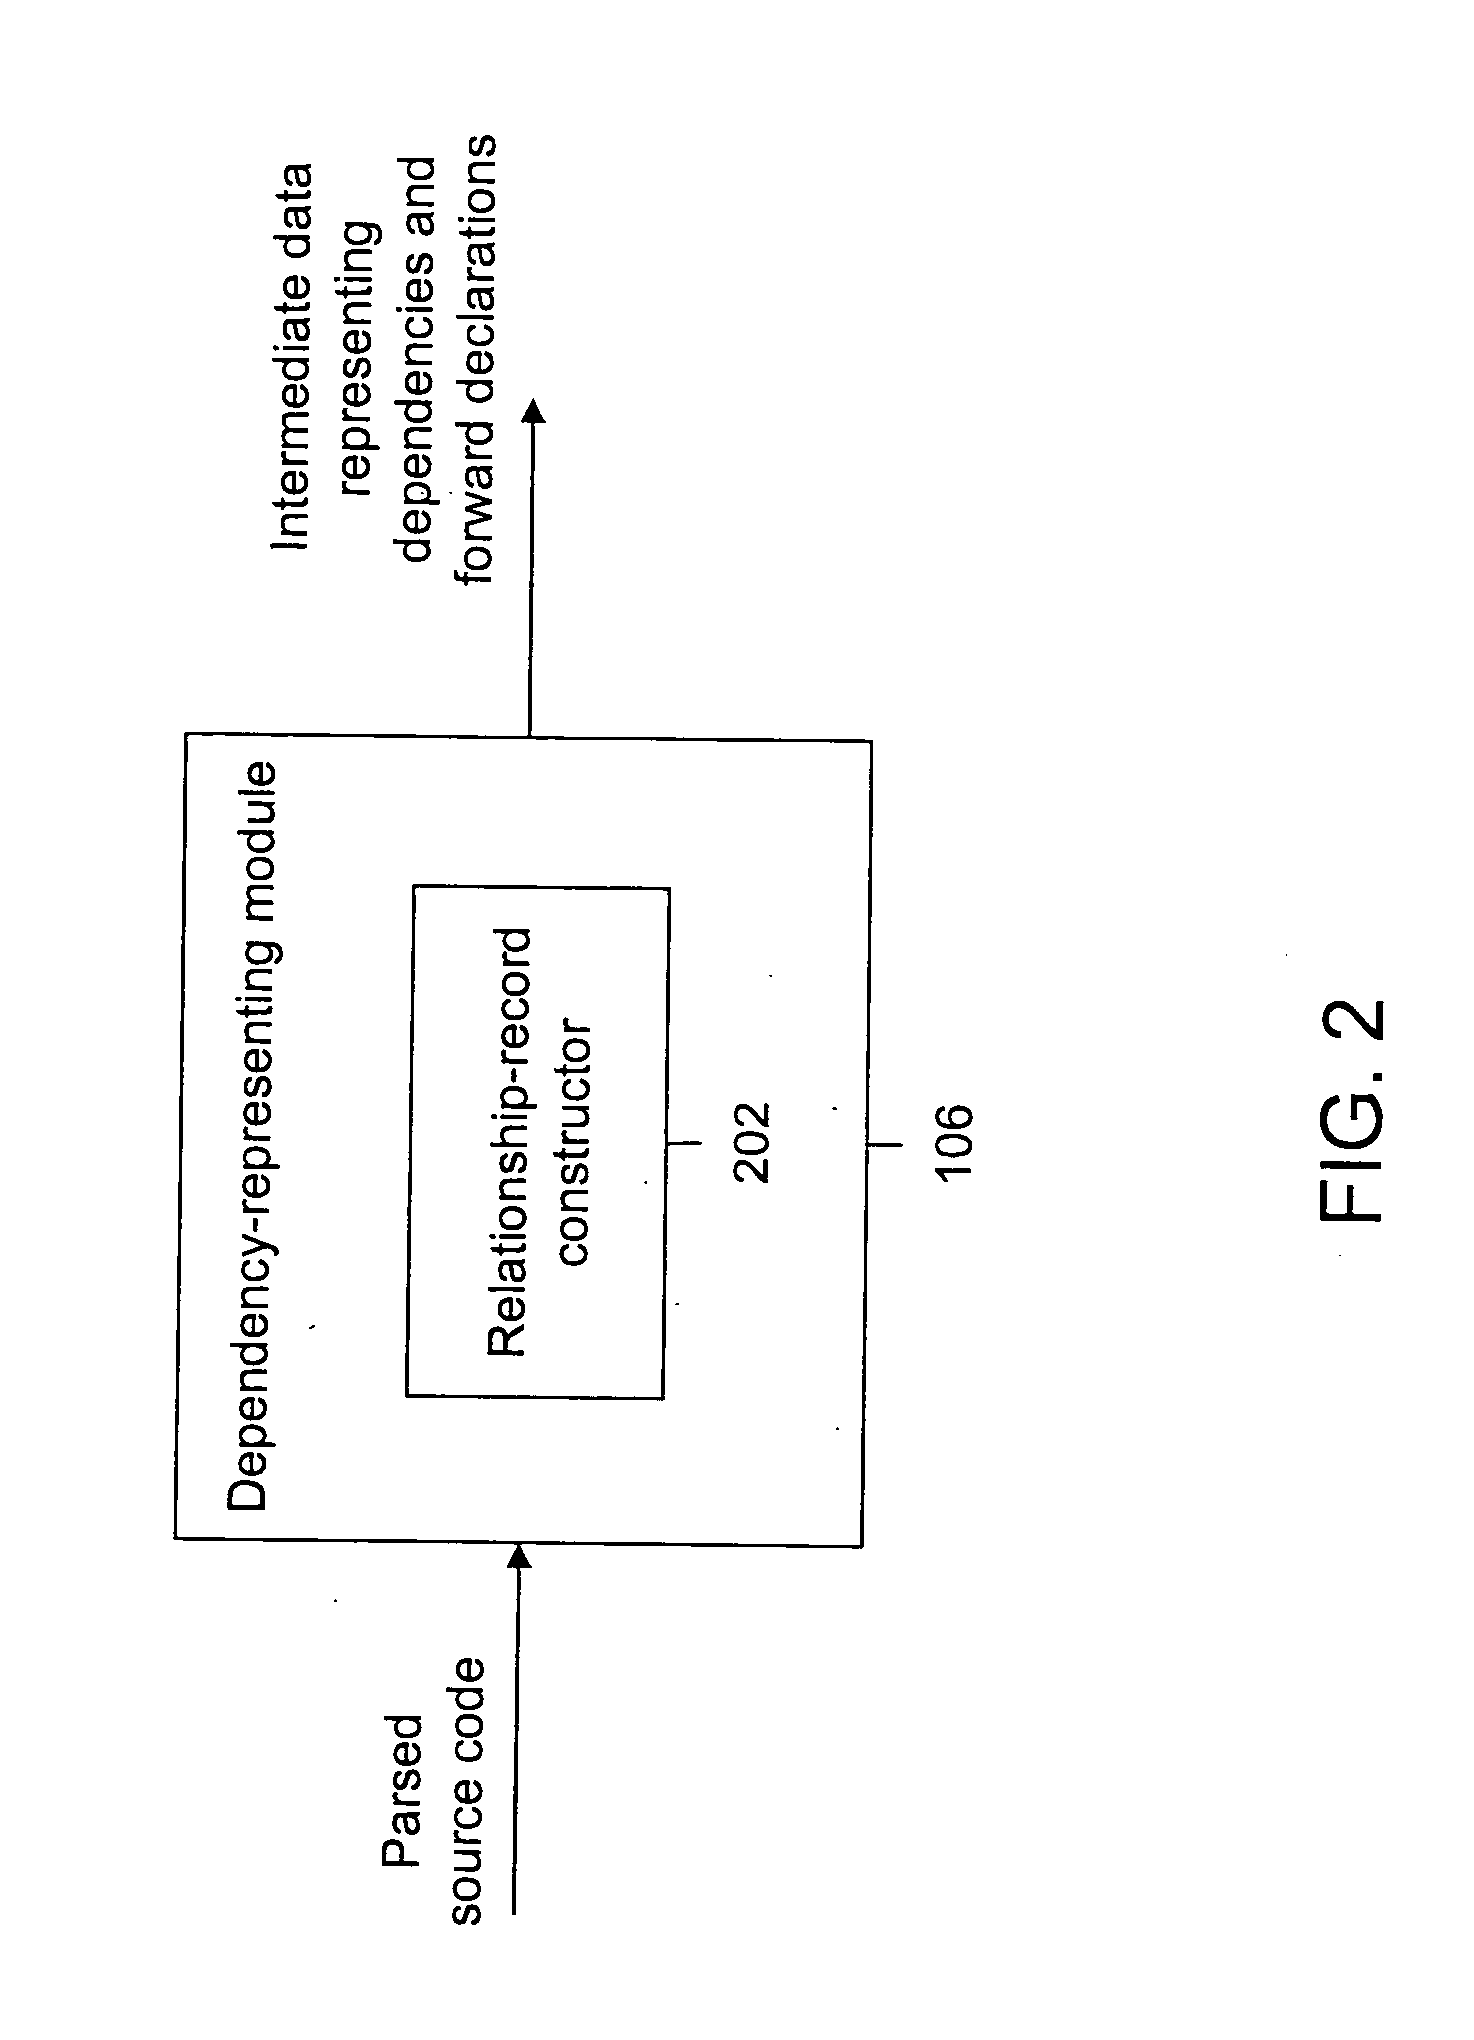 Method and system for optimizing source code